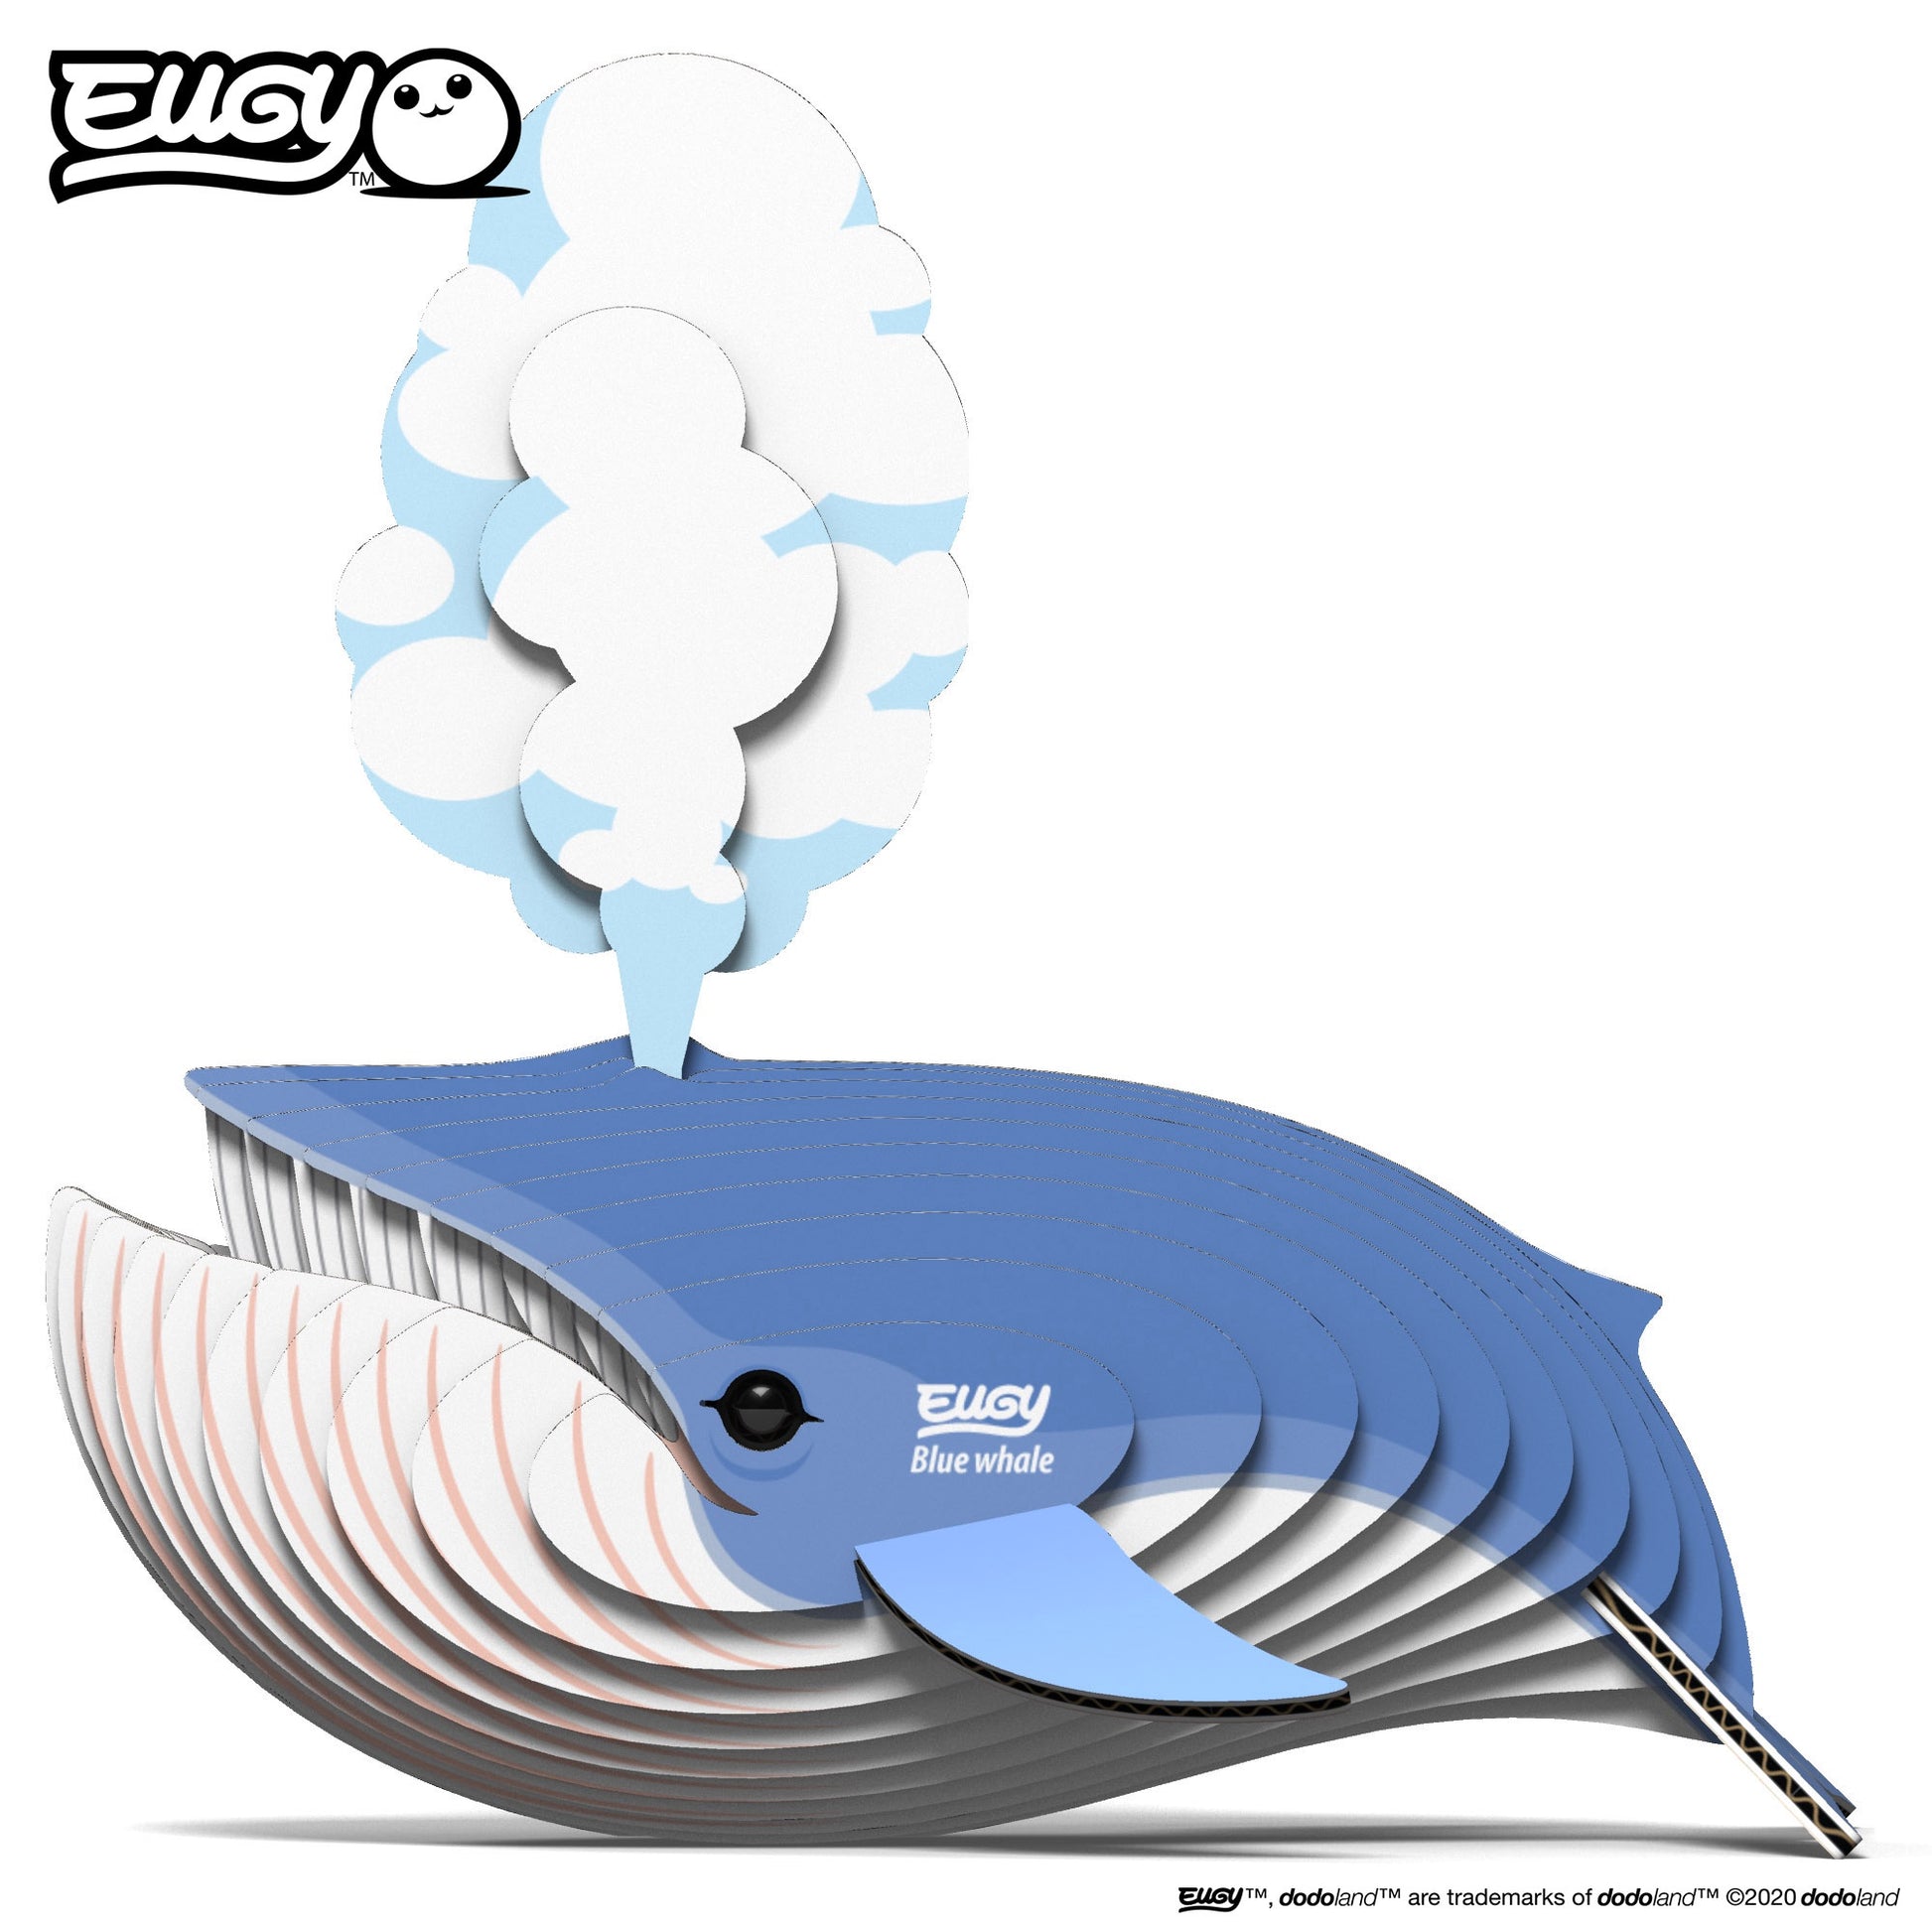 A photo of the completed Blue Whale 3D puzzle by Eugy, showcasing intricate details and vibrant colors